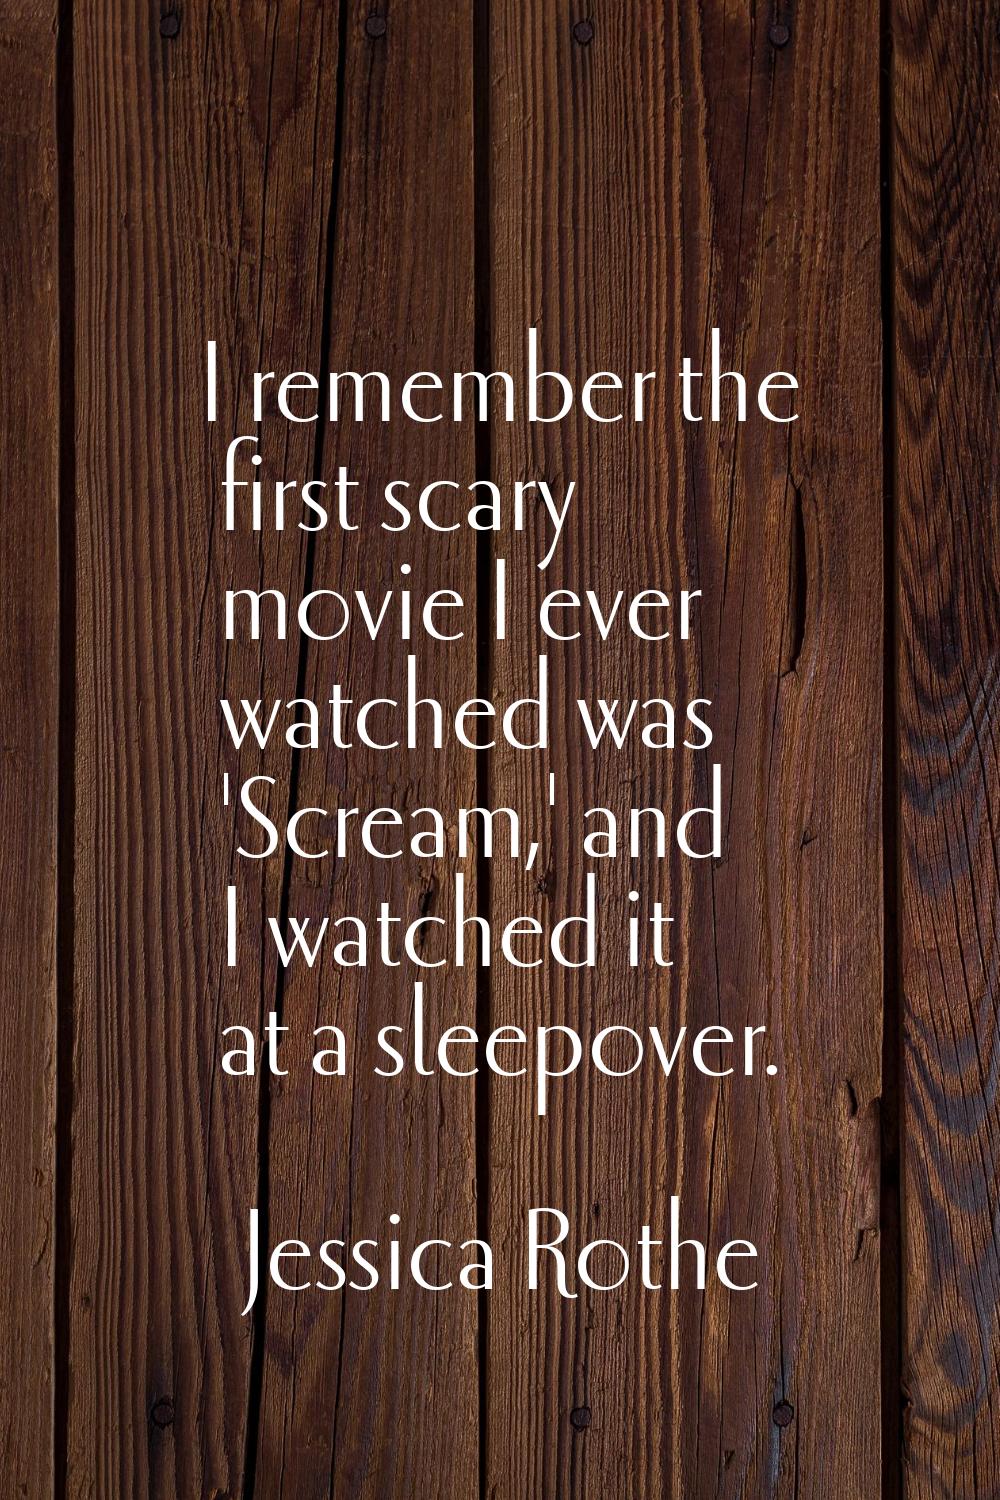 I remember the first scary movie I ever watched was 'Scream,' and I watched it at a sleepover.